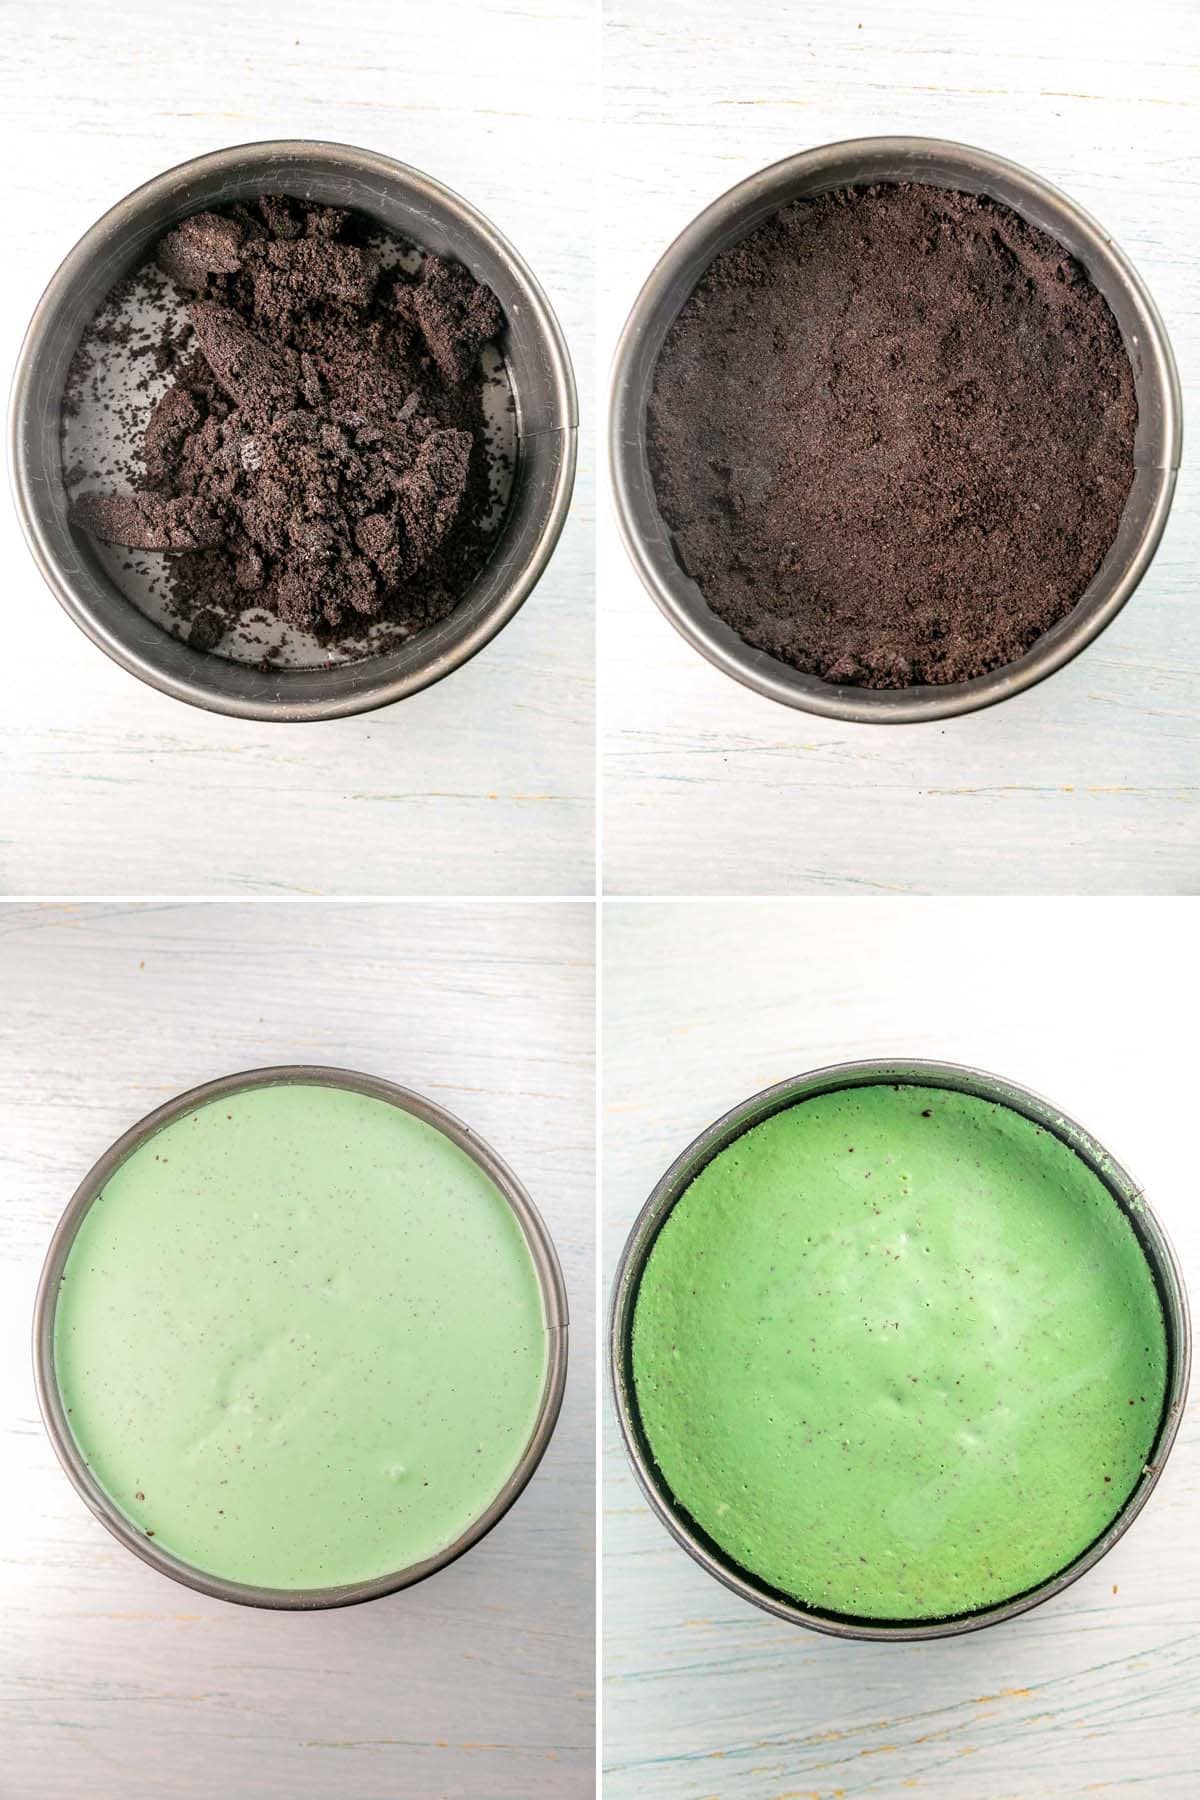 step by step photos showing oreo crumbs in a springform pan, oreo crust, cheesecake before baking, and cheesecake after baking.